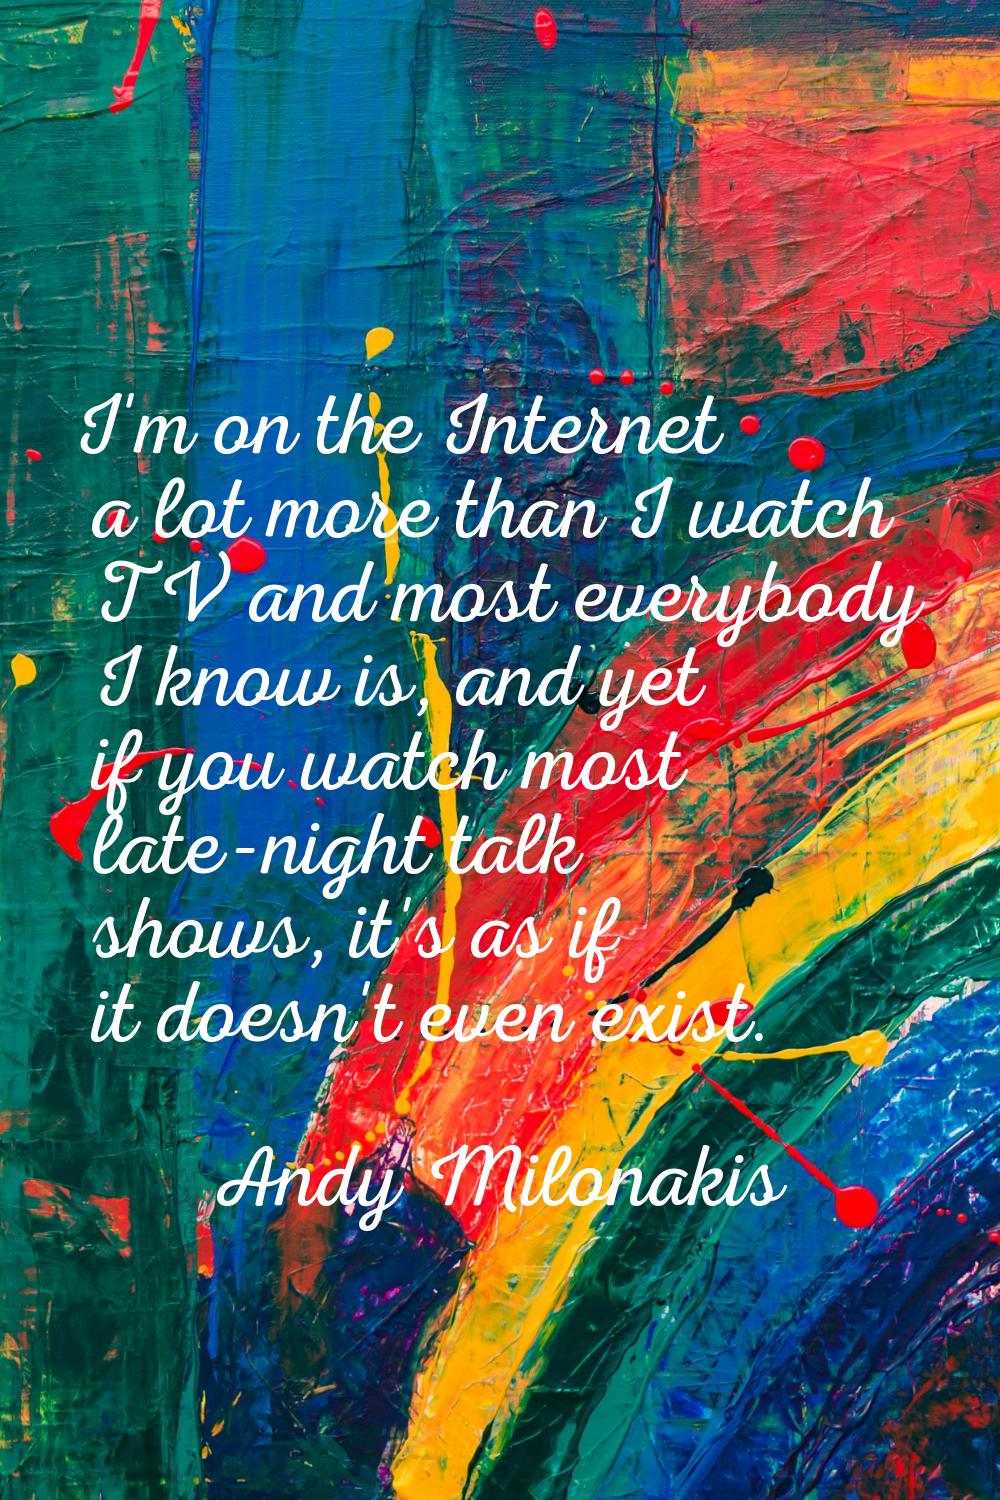 I'm on the Internet a lot more than I watch TV and most everybody I know is, and yet if you watch m